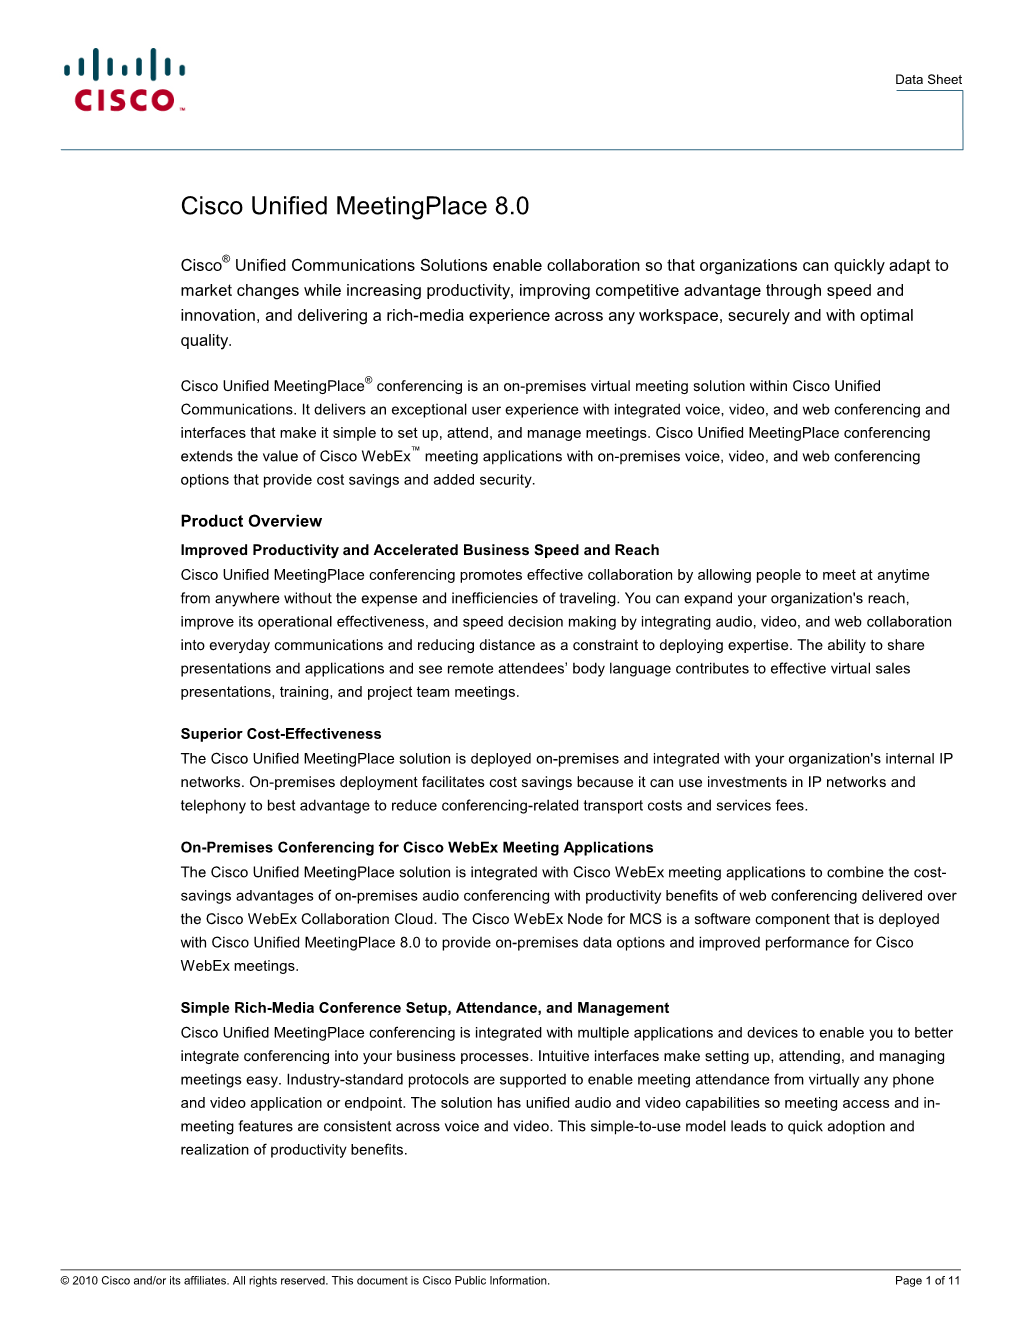 Cisco Unified Meetingplace 8.0